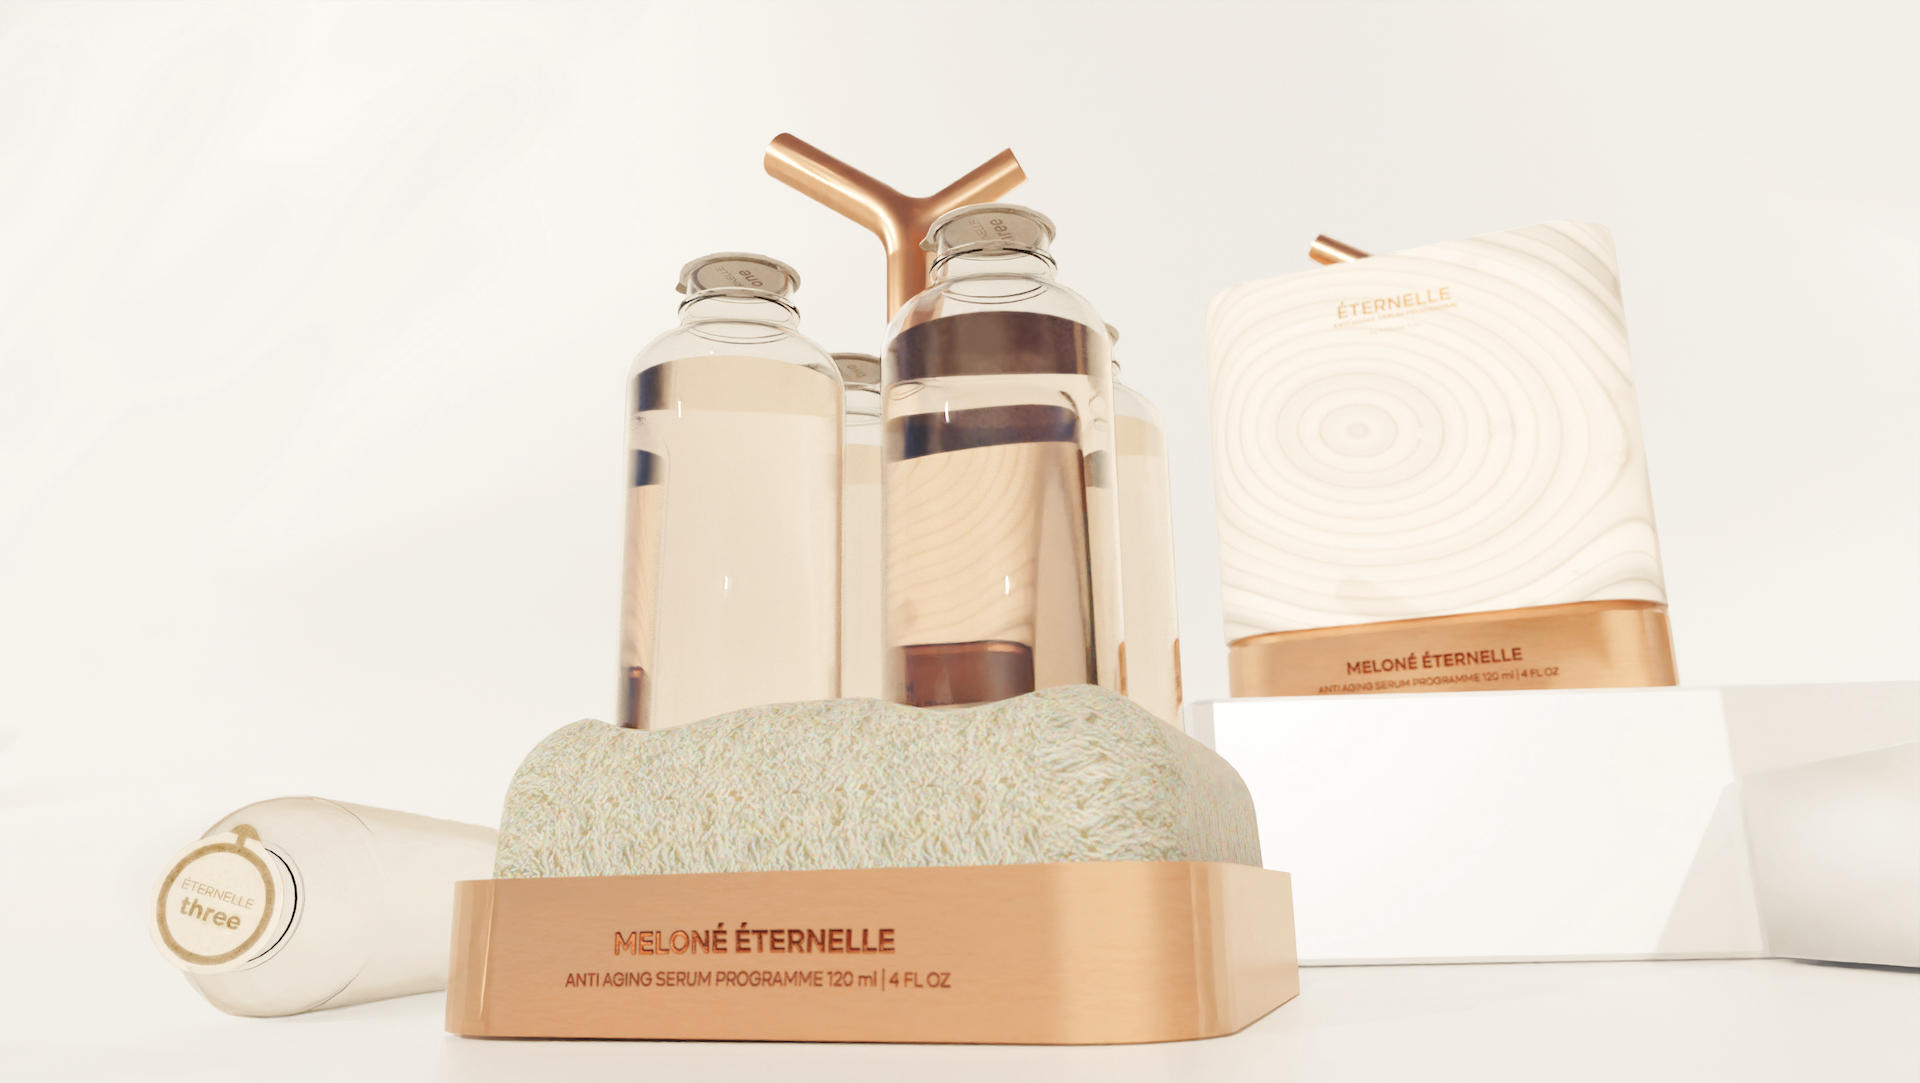 MUSE Design Winners - Eternelle - Refillable Sustainable Packaging from Mushrooms